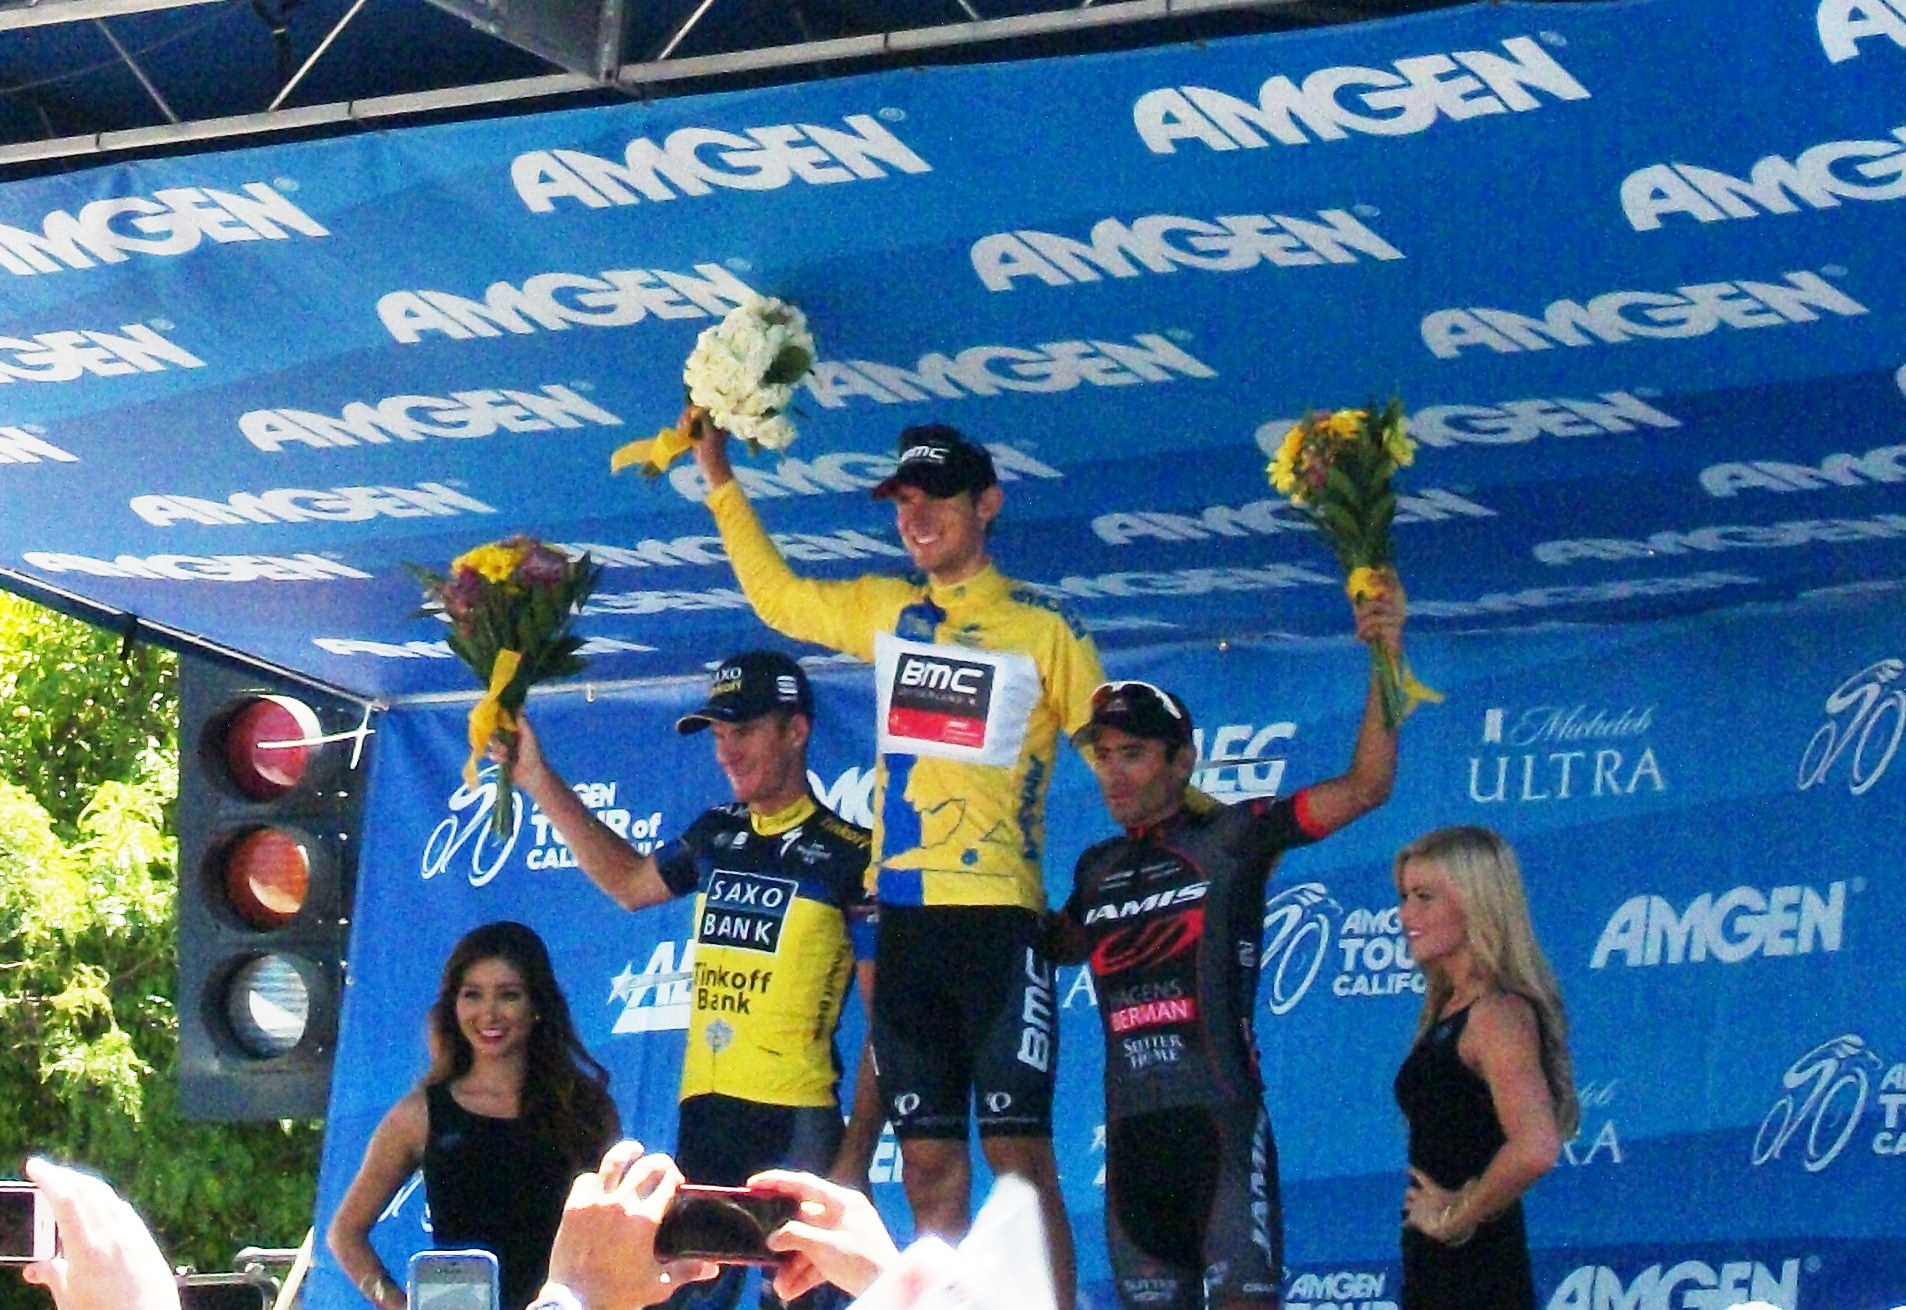 The top finishers of the 2013 AMGEN Tour of California